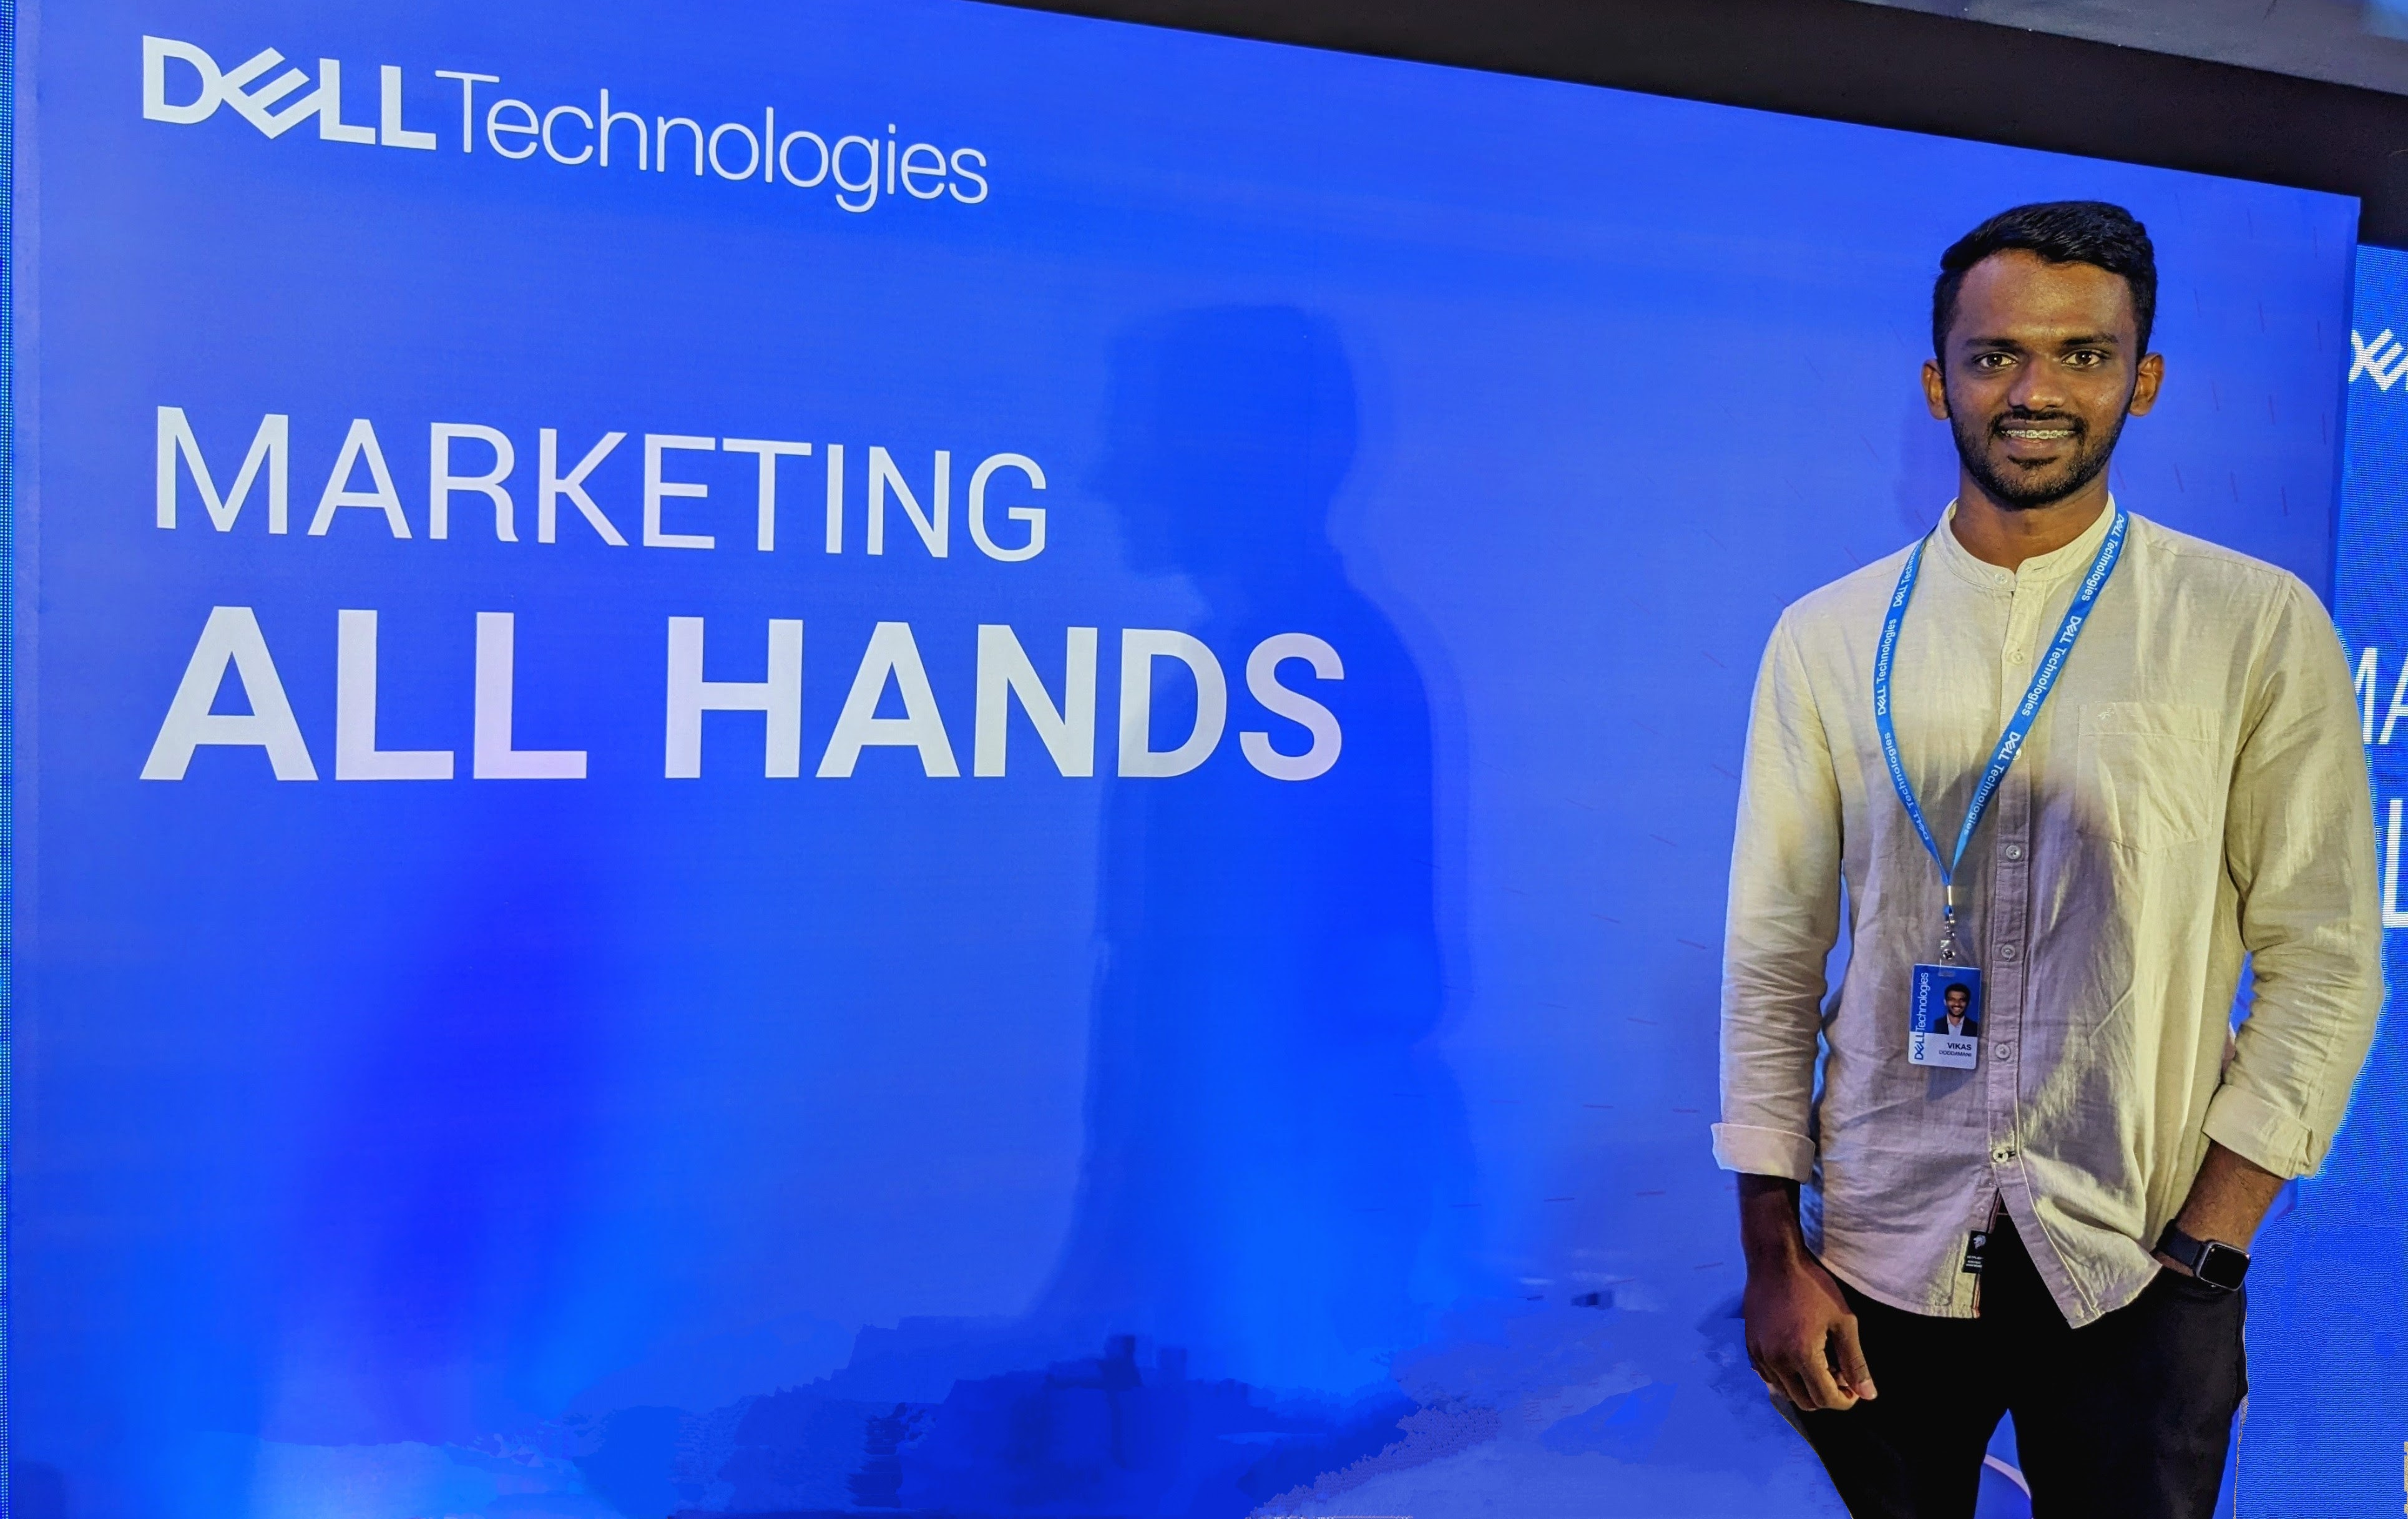 Vikas stands in front of a sign for a marketing all hands meeting.